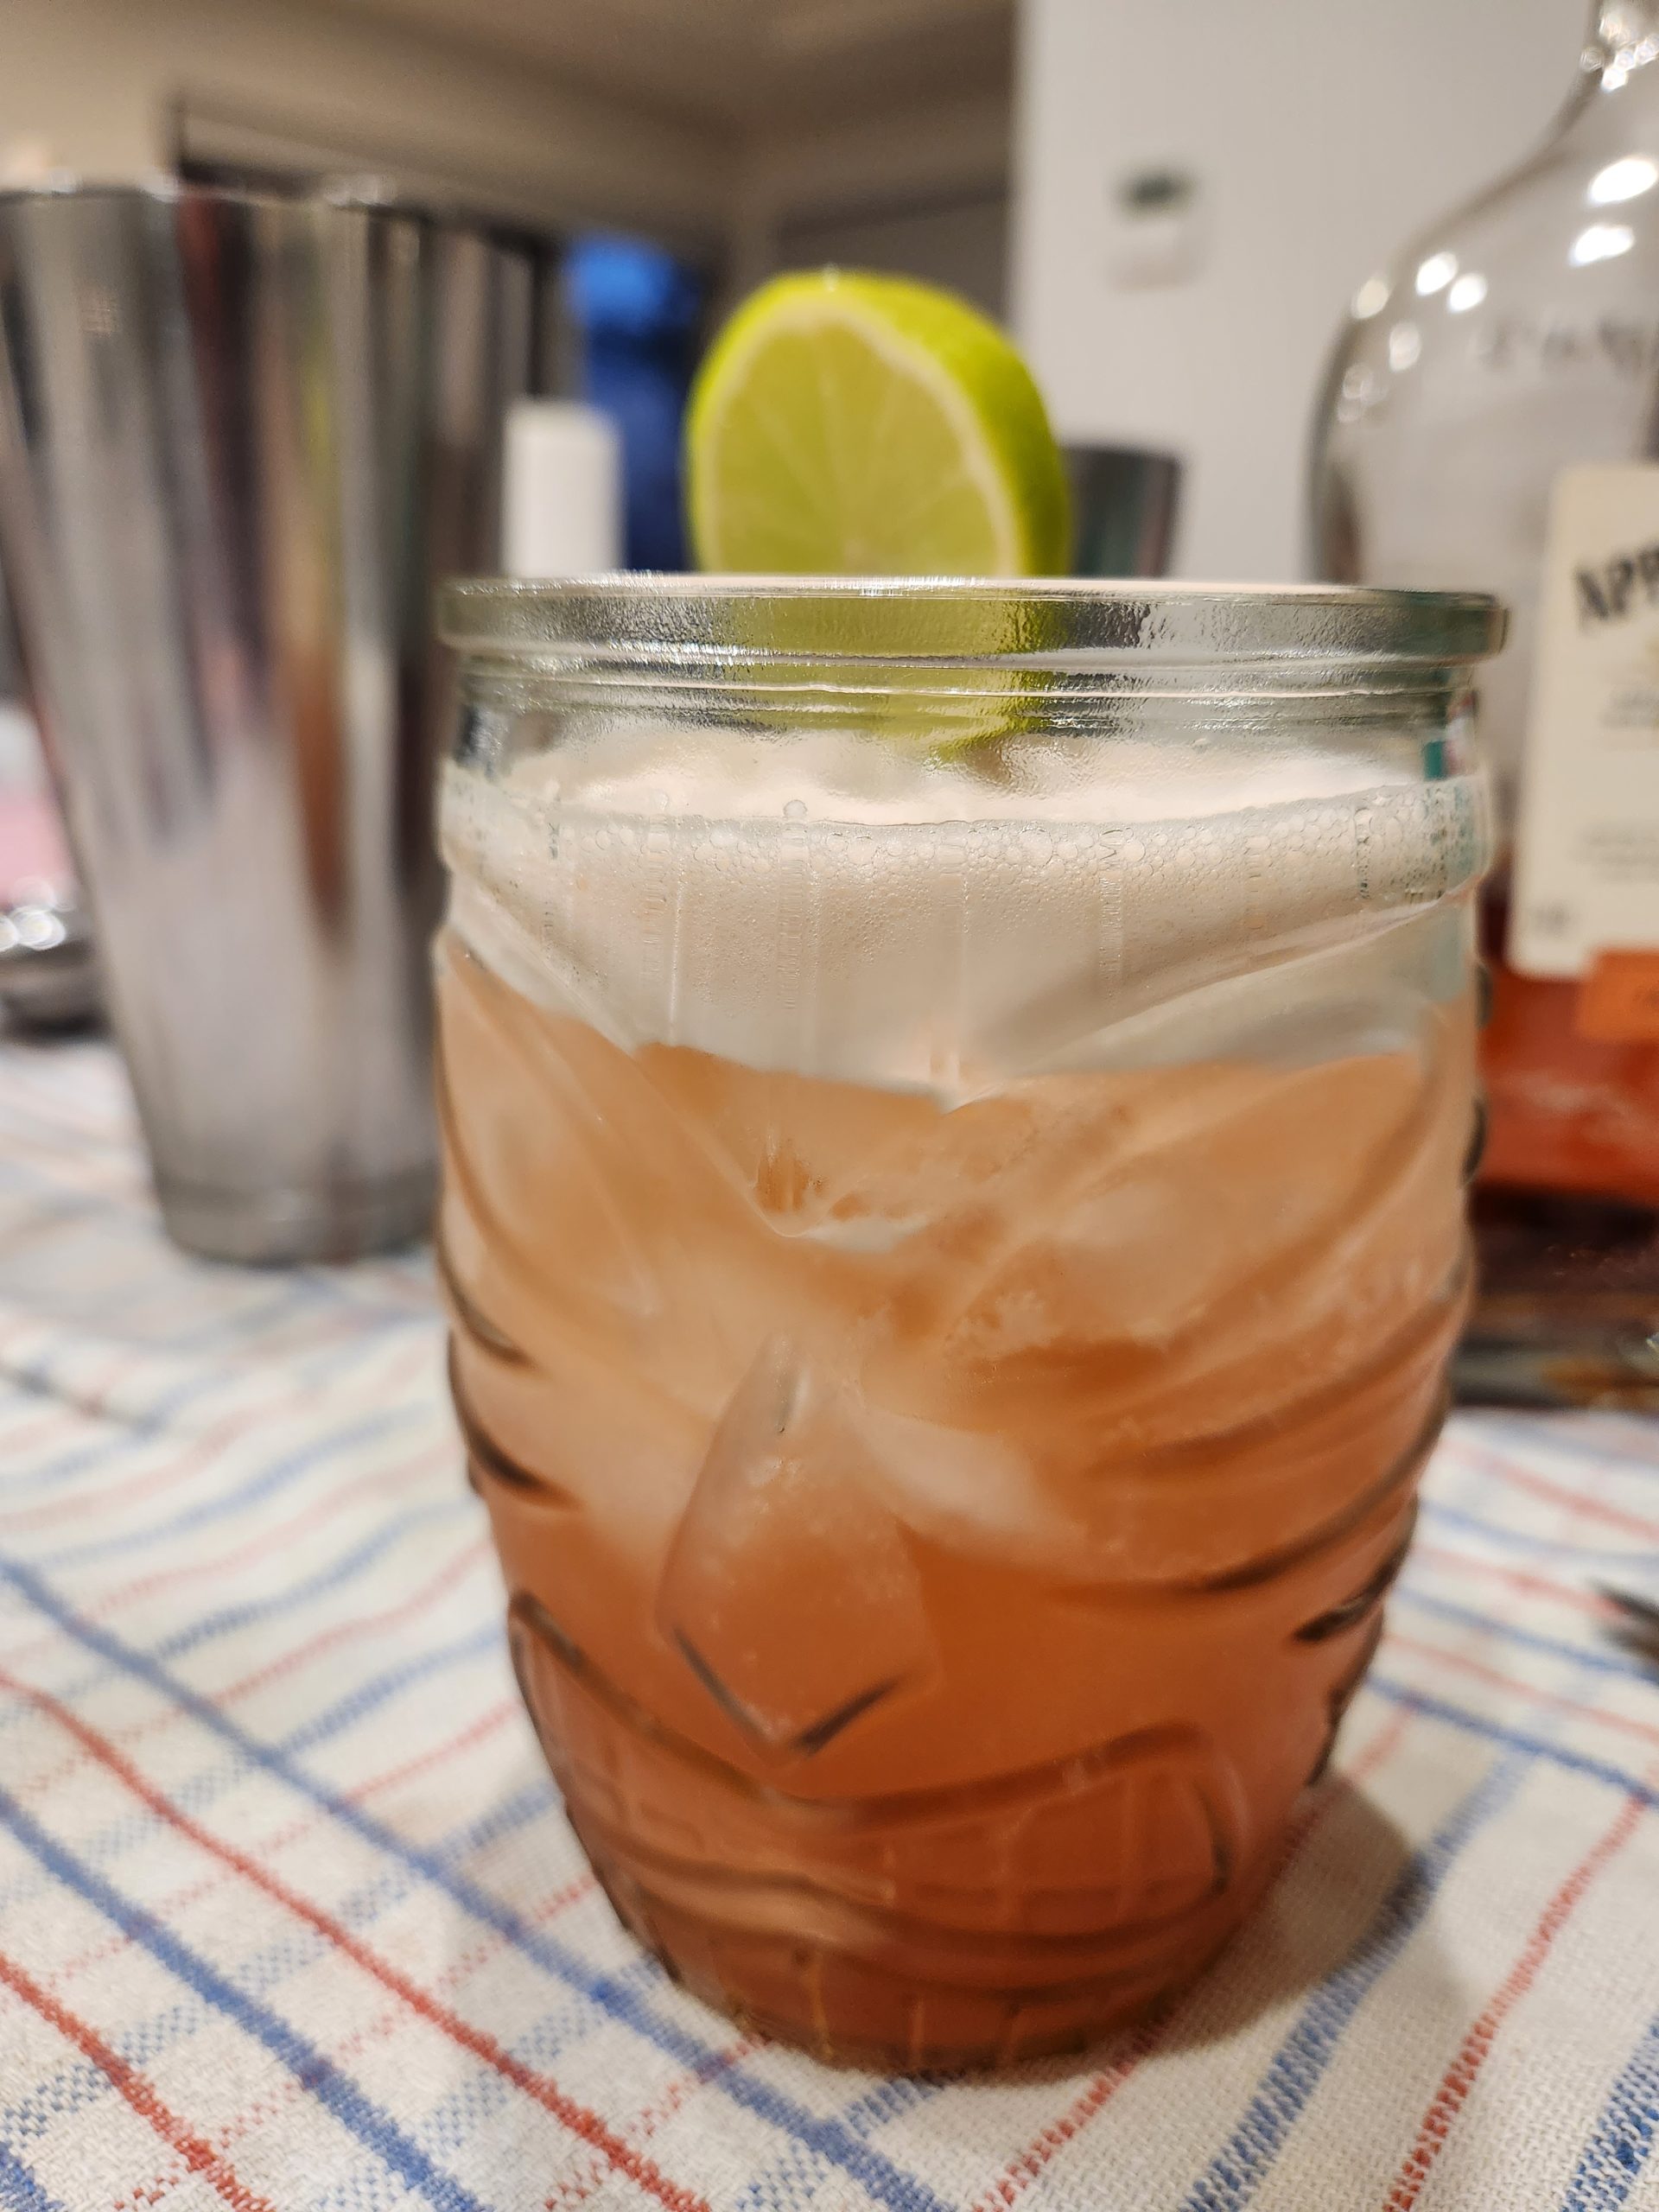 A Planters Punch cocktail in a glass Tiki mug.